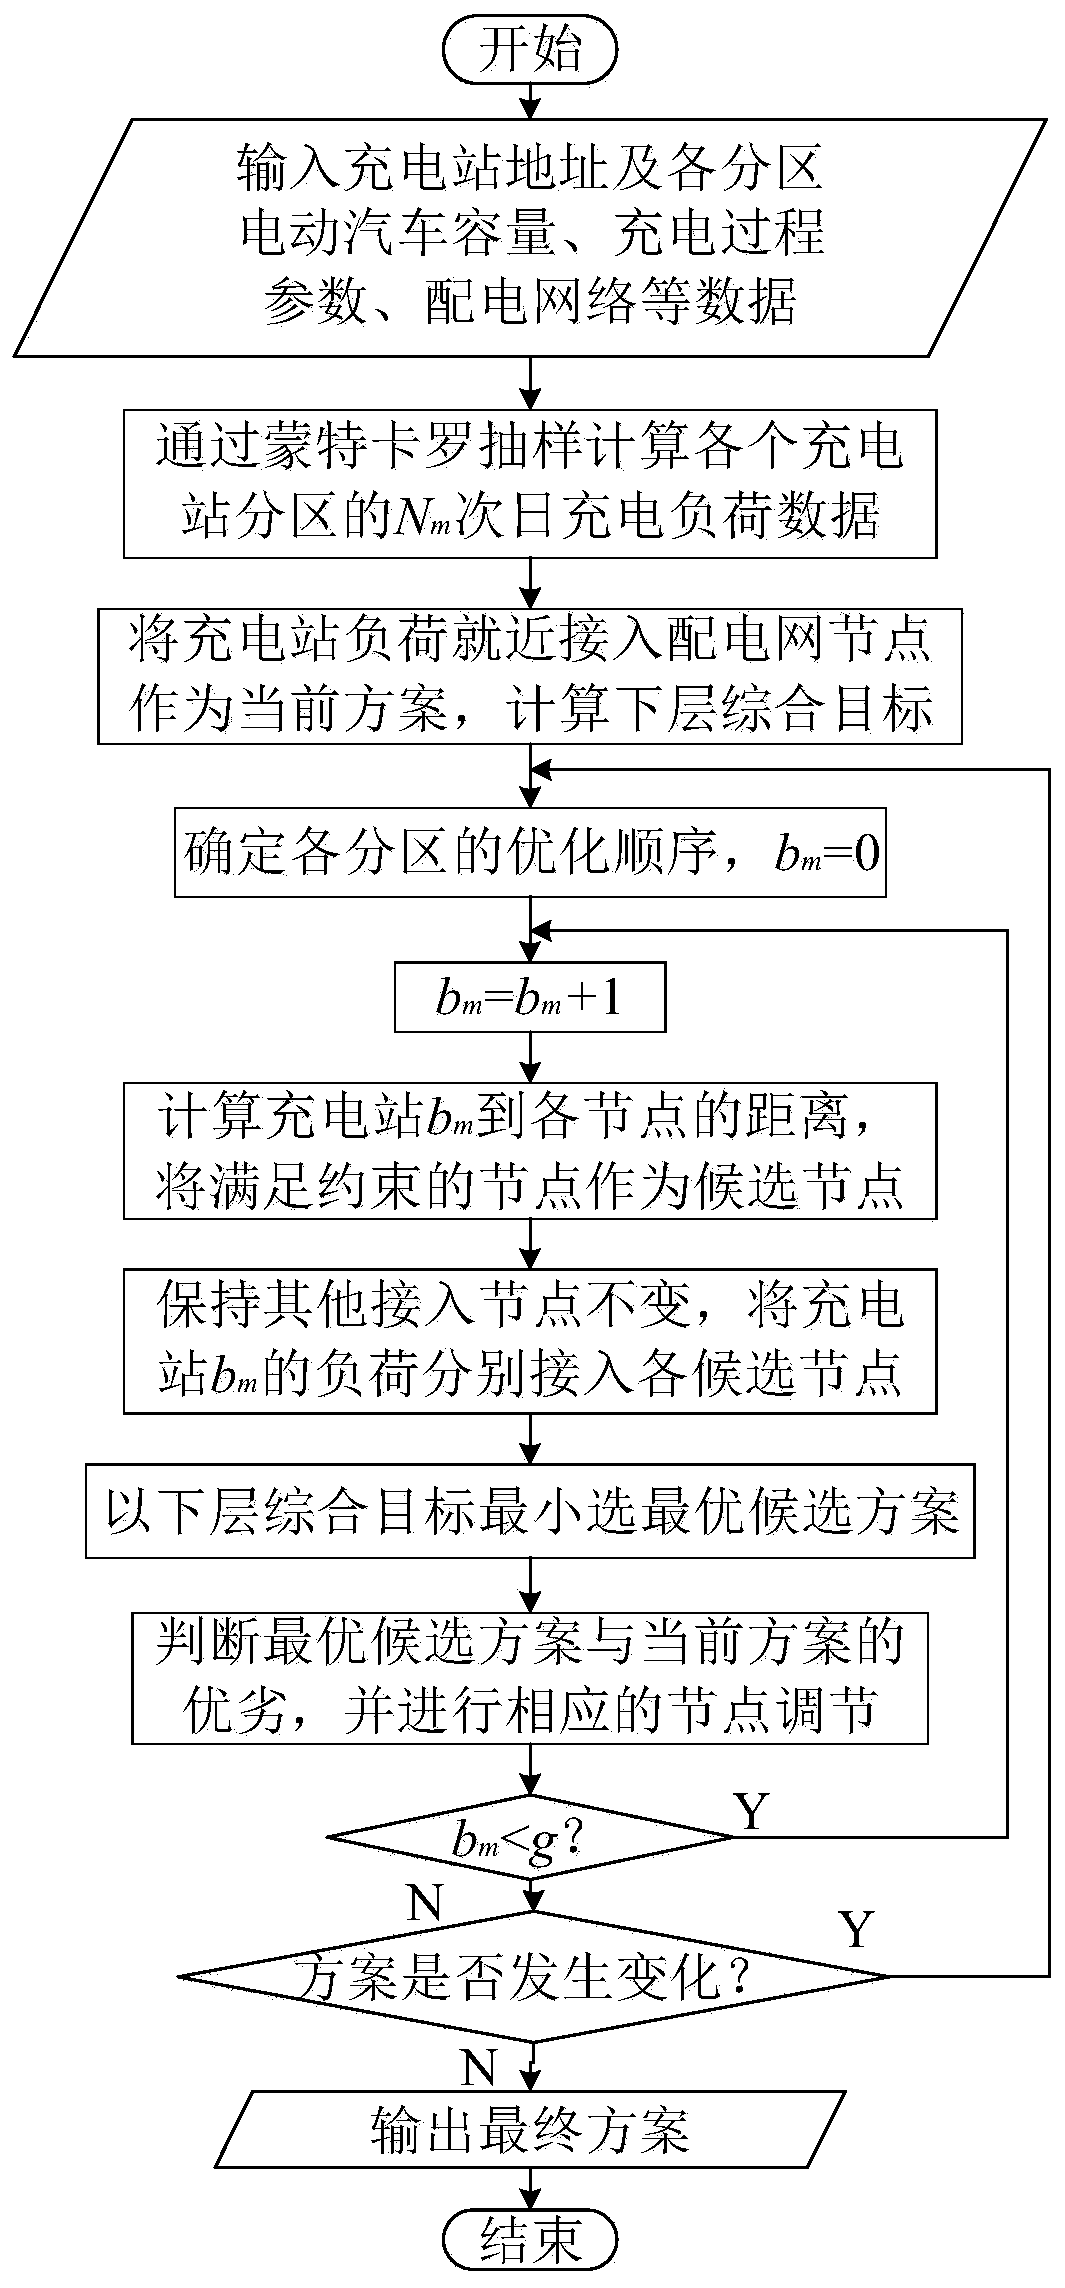 Charging station planning method considering user charging experience and power distribution network operation risk